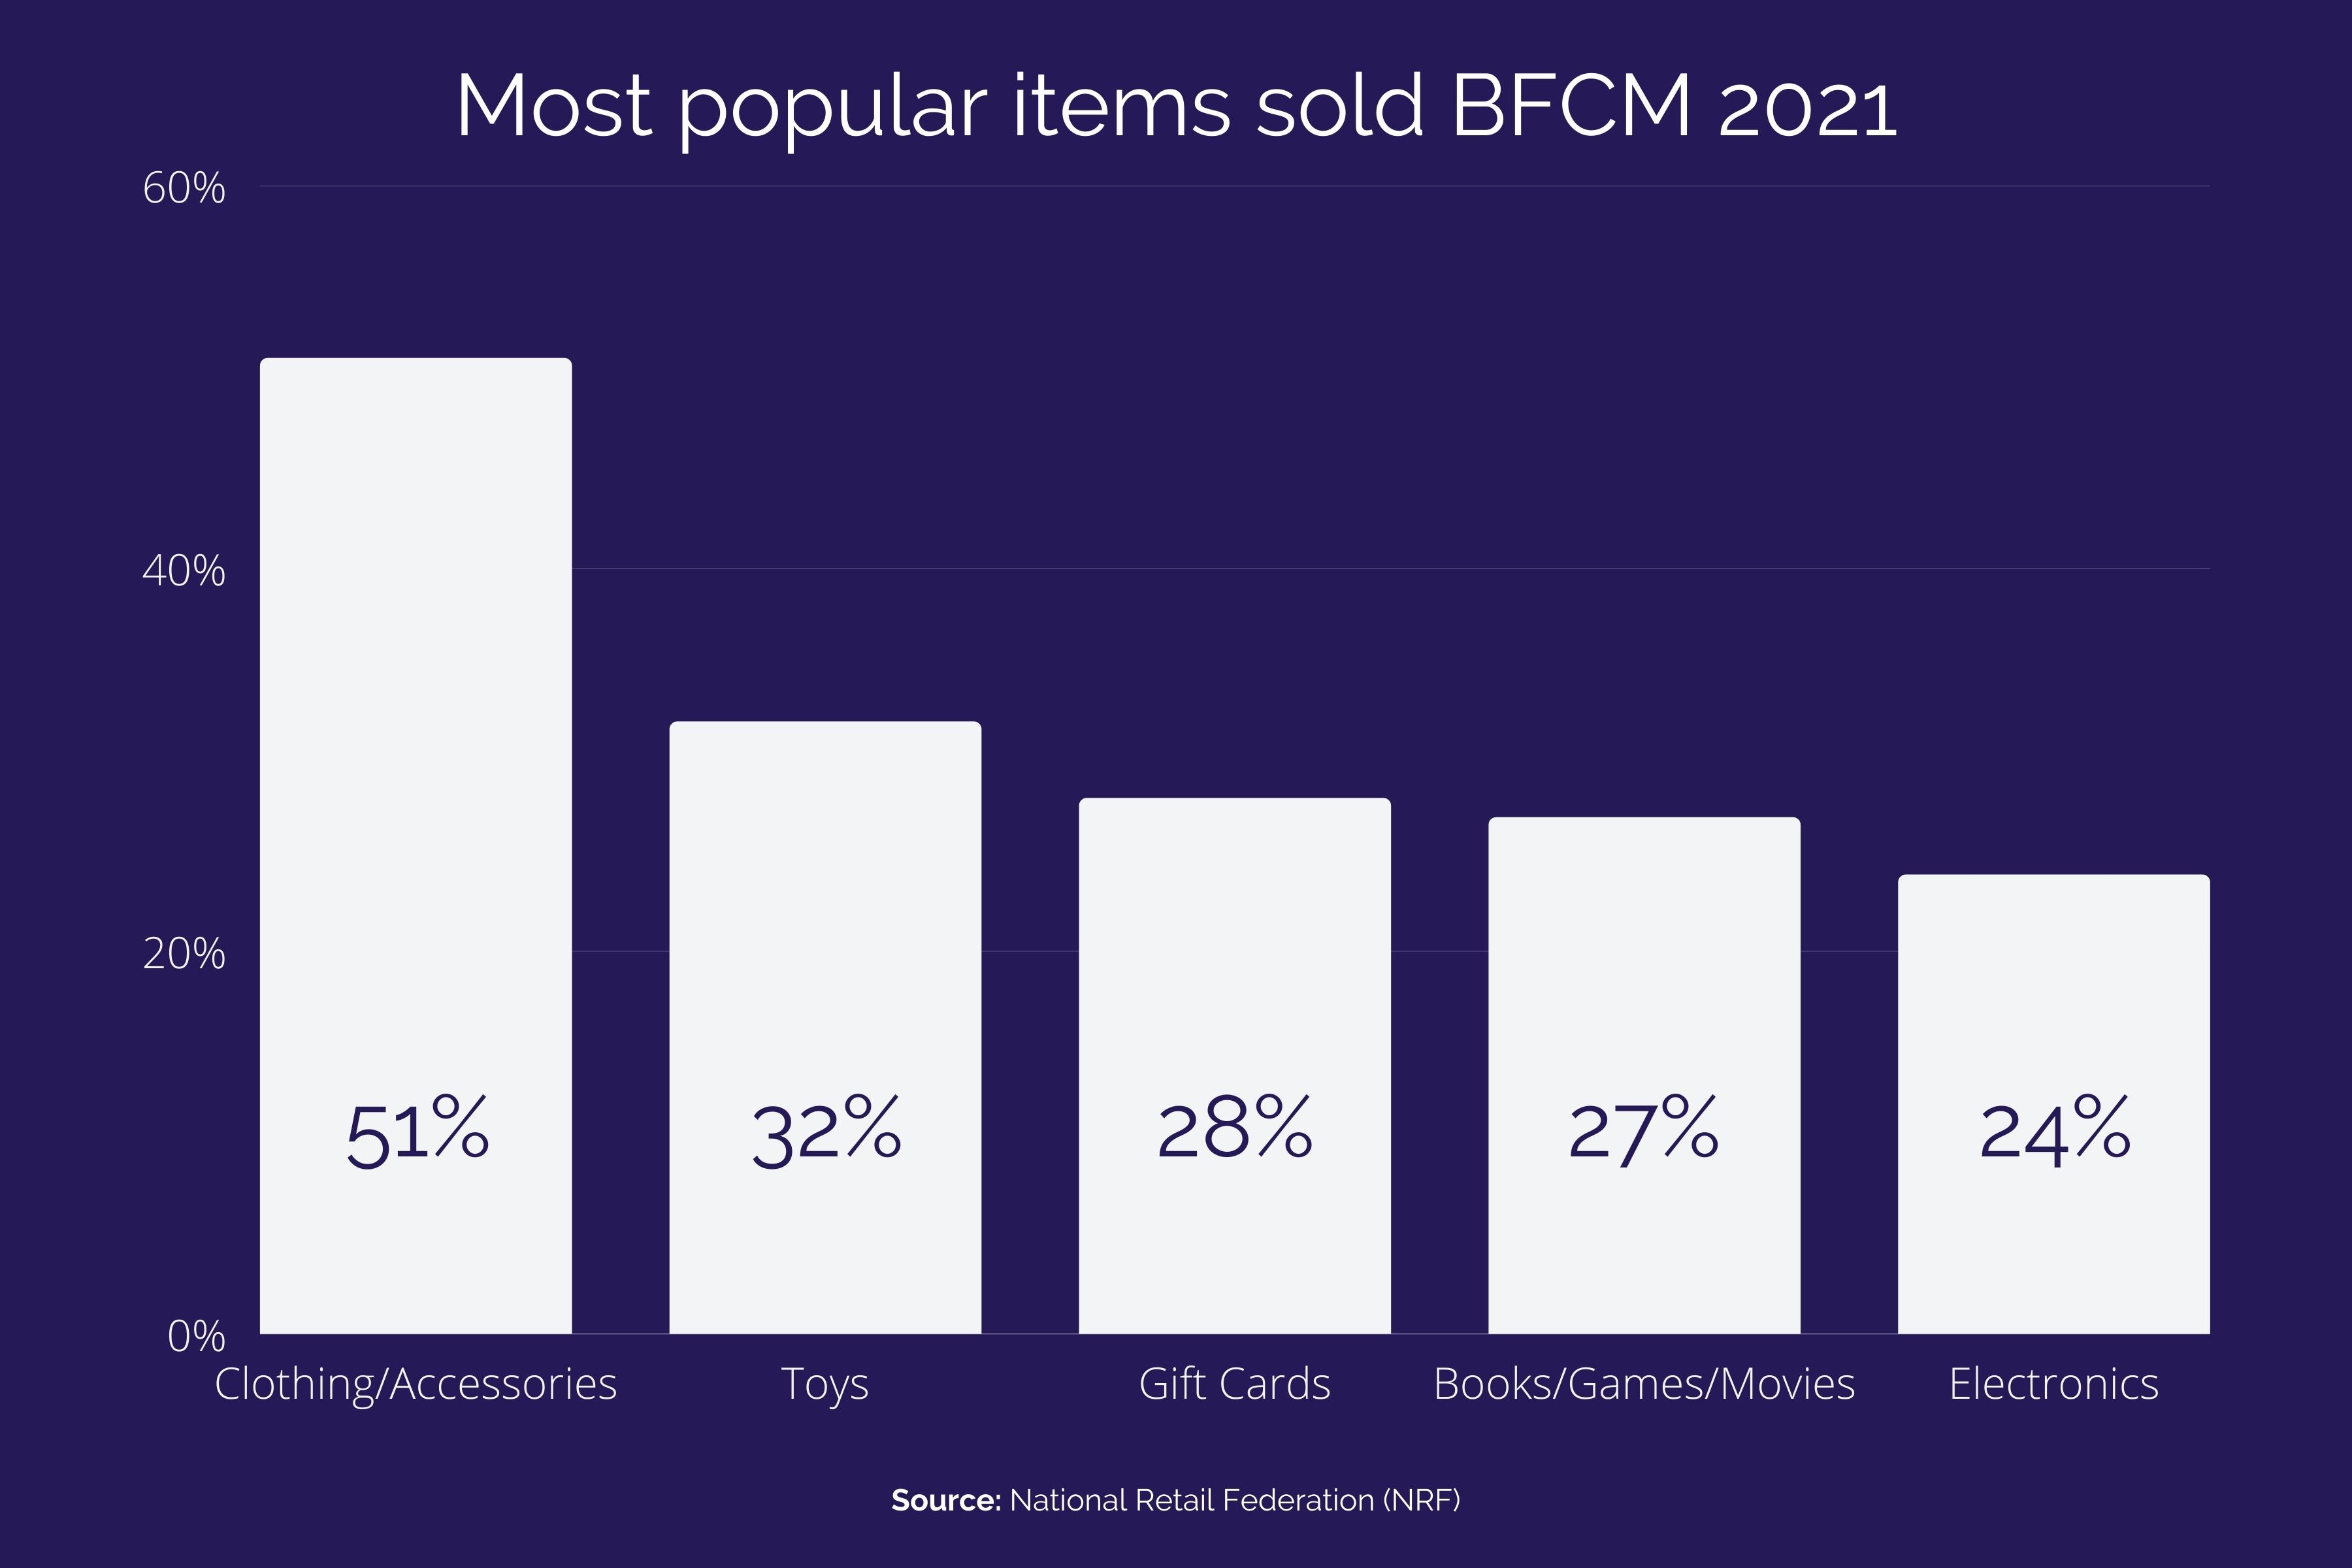 Most popular items sold BFCM 2021